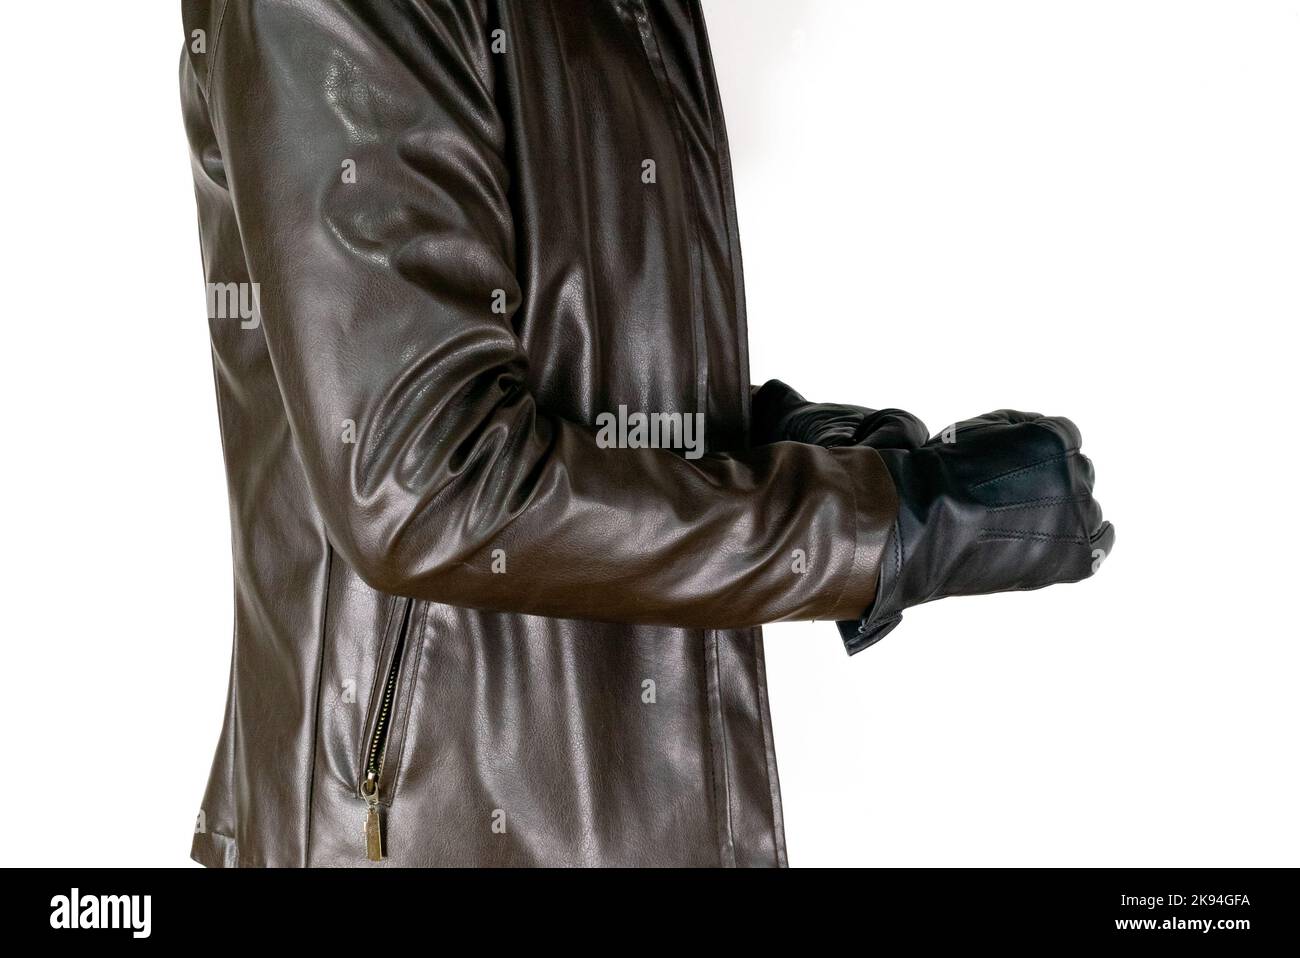 Men brown jacket and leather glove on white background. Spring stylish man wear brown leather jacket and fist hand with glove. Stock Photo